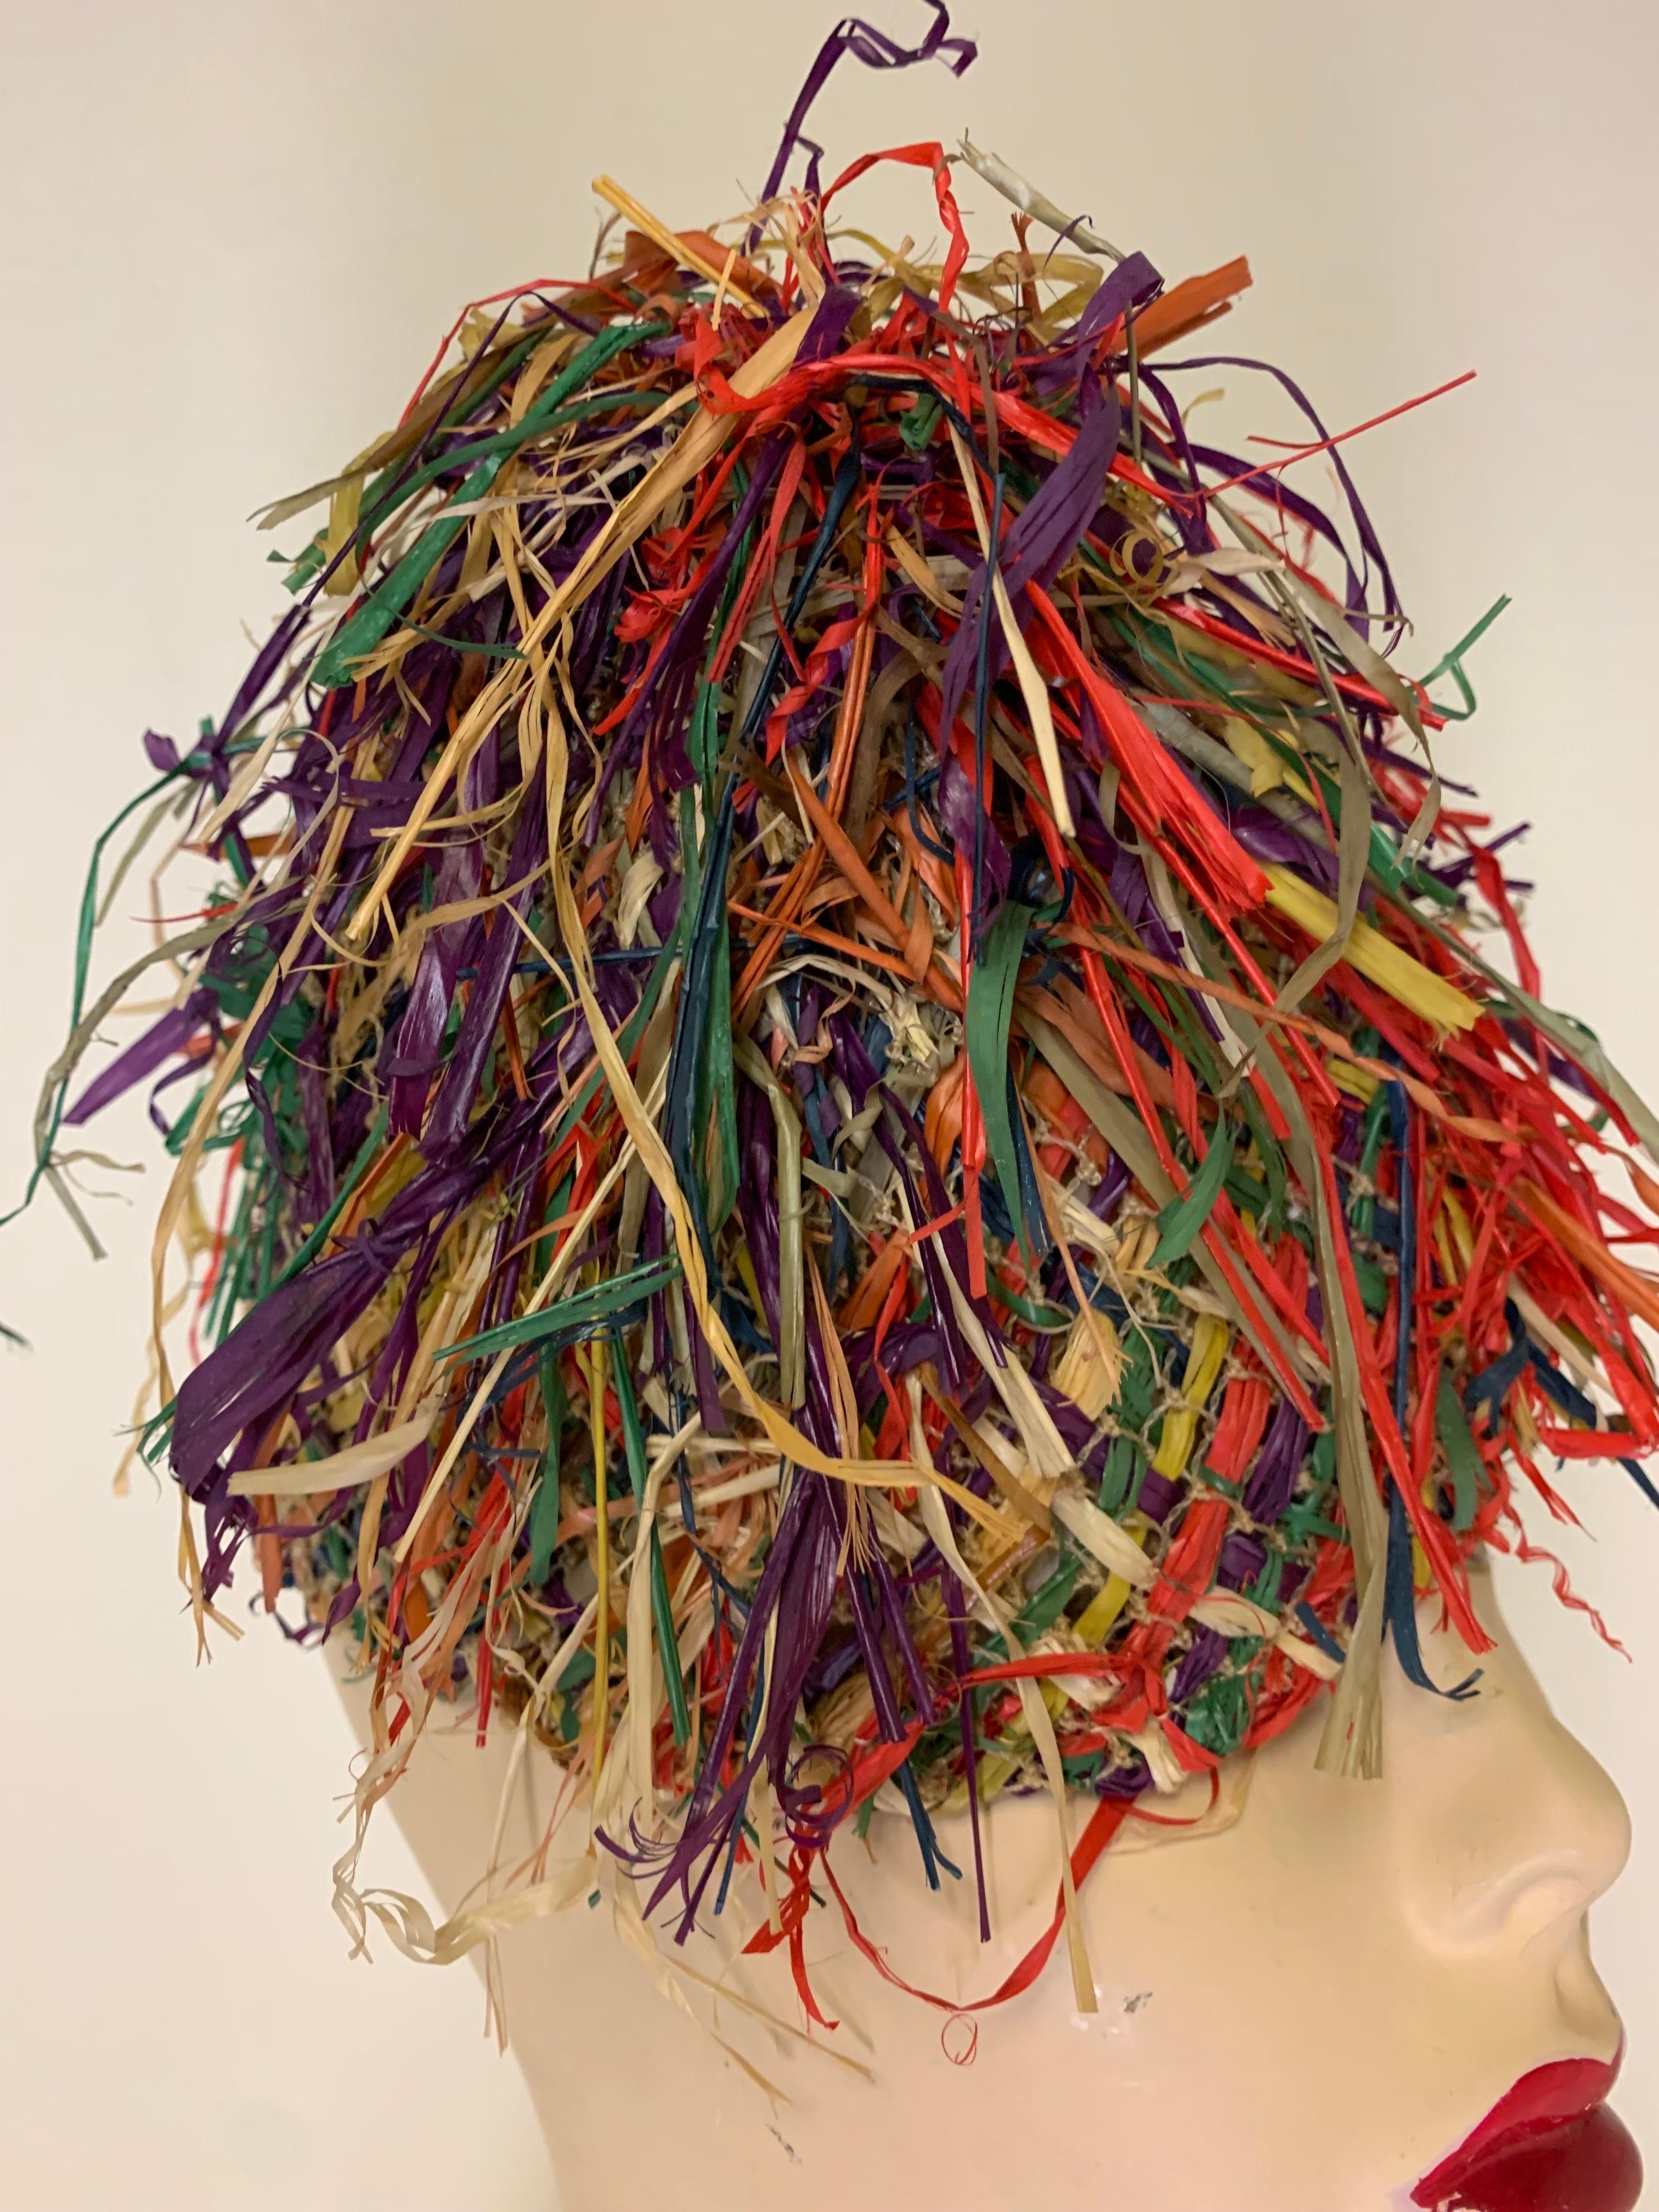 An unusual and rare toy-style 1940s Charmer by John Frederics frisée-style multicolor fringed straw toy hat in a cone shape. A whimsical brimless shape by a legendary milliner. One size. 